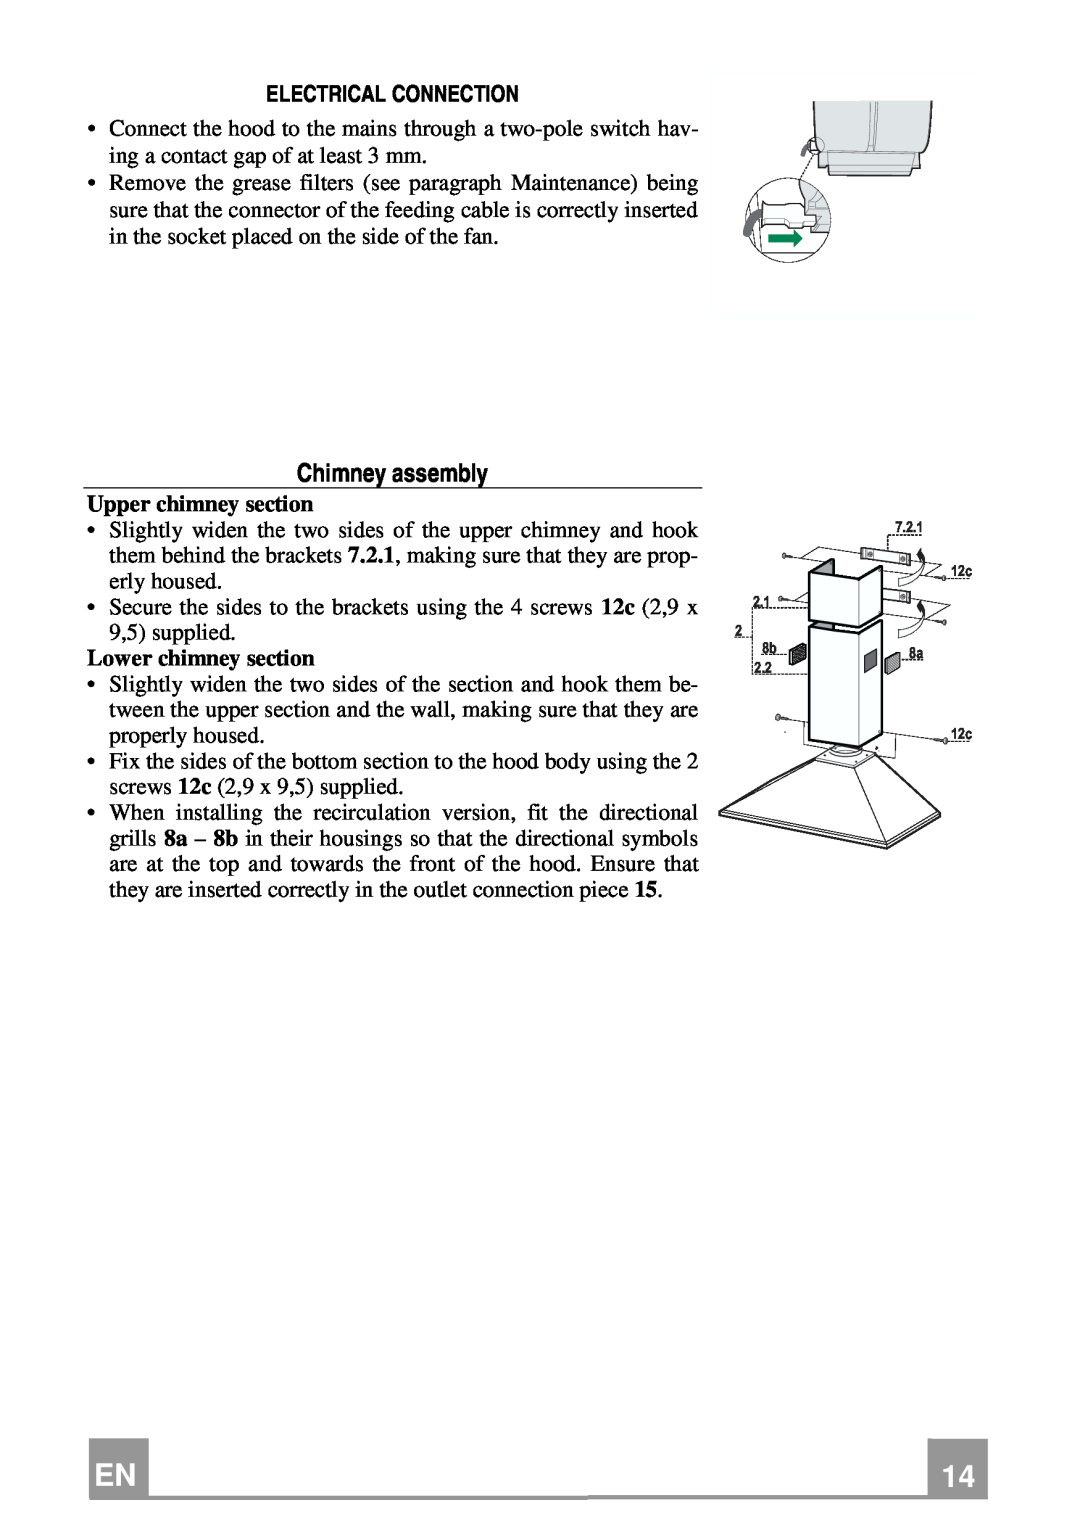 Rangemaster Chimney Hood manual Chimney assembly, Electrical Connection, Upper chimney section, Lower chimney section 